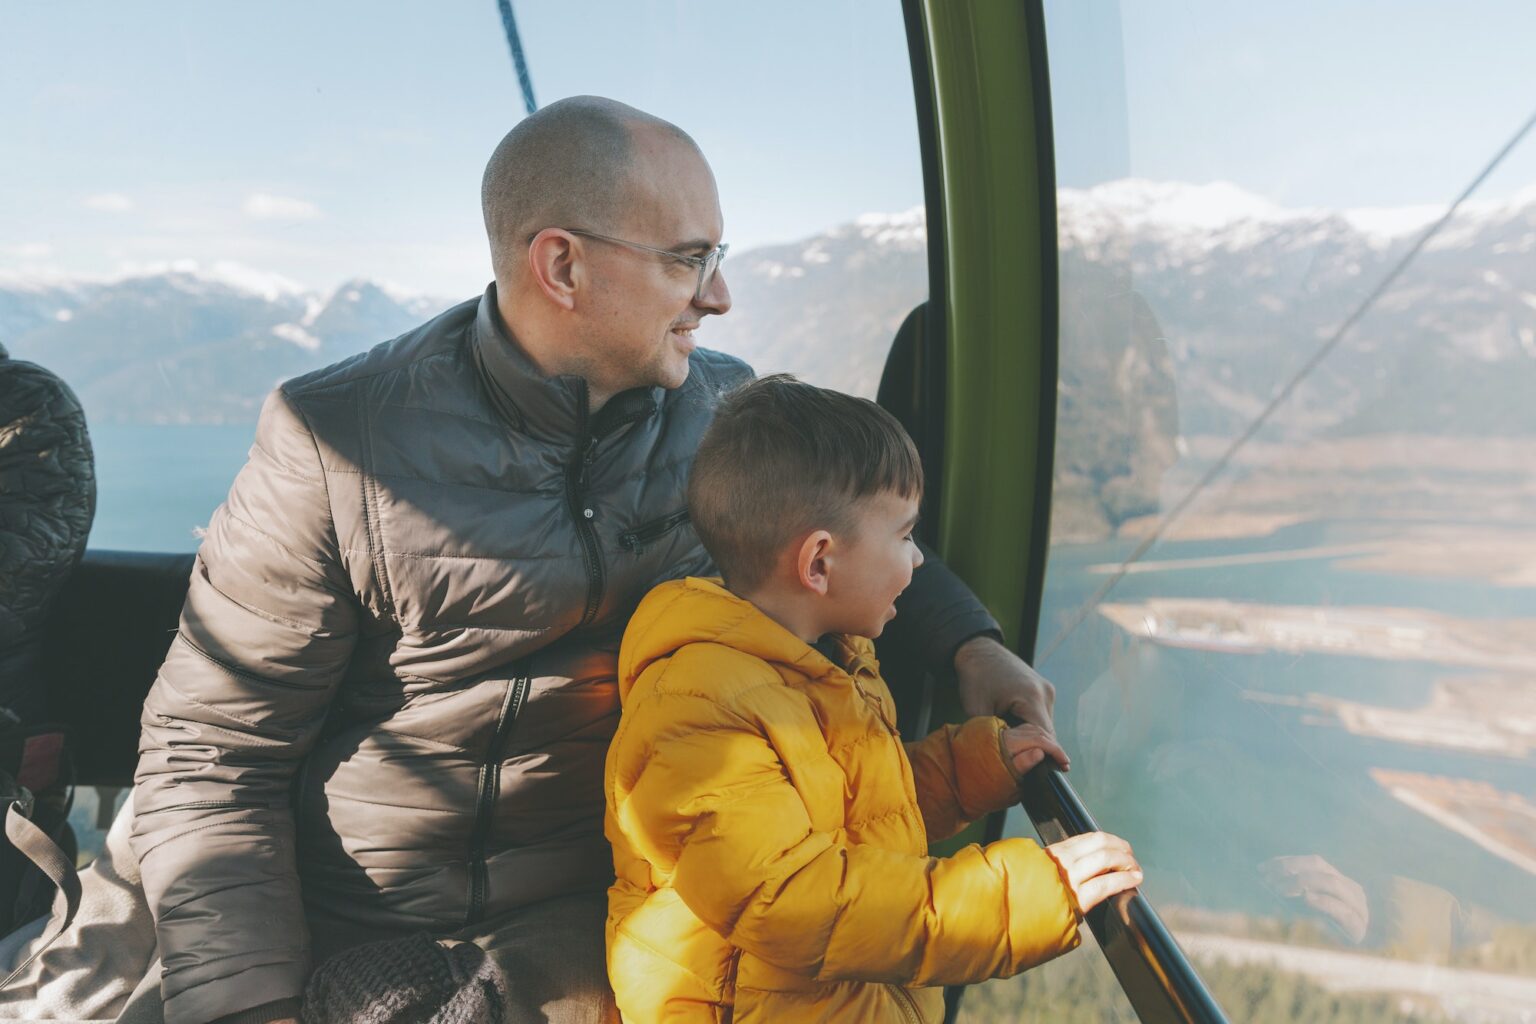 Father and son in the gondola of a cable car, Squamish, Canada